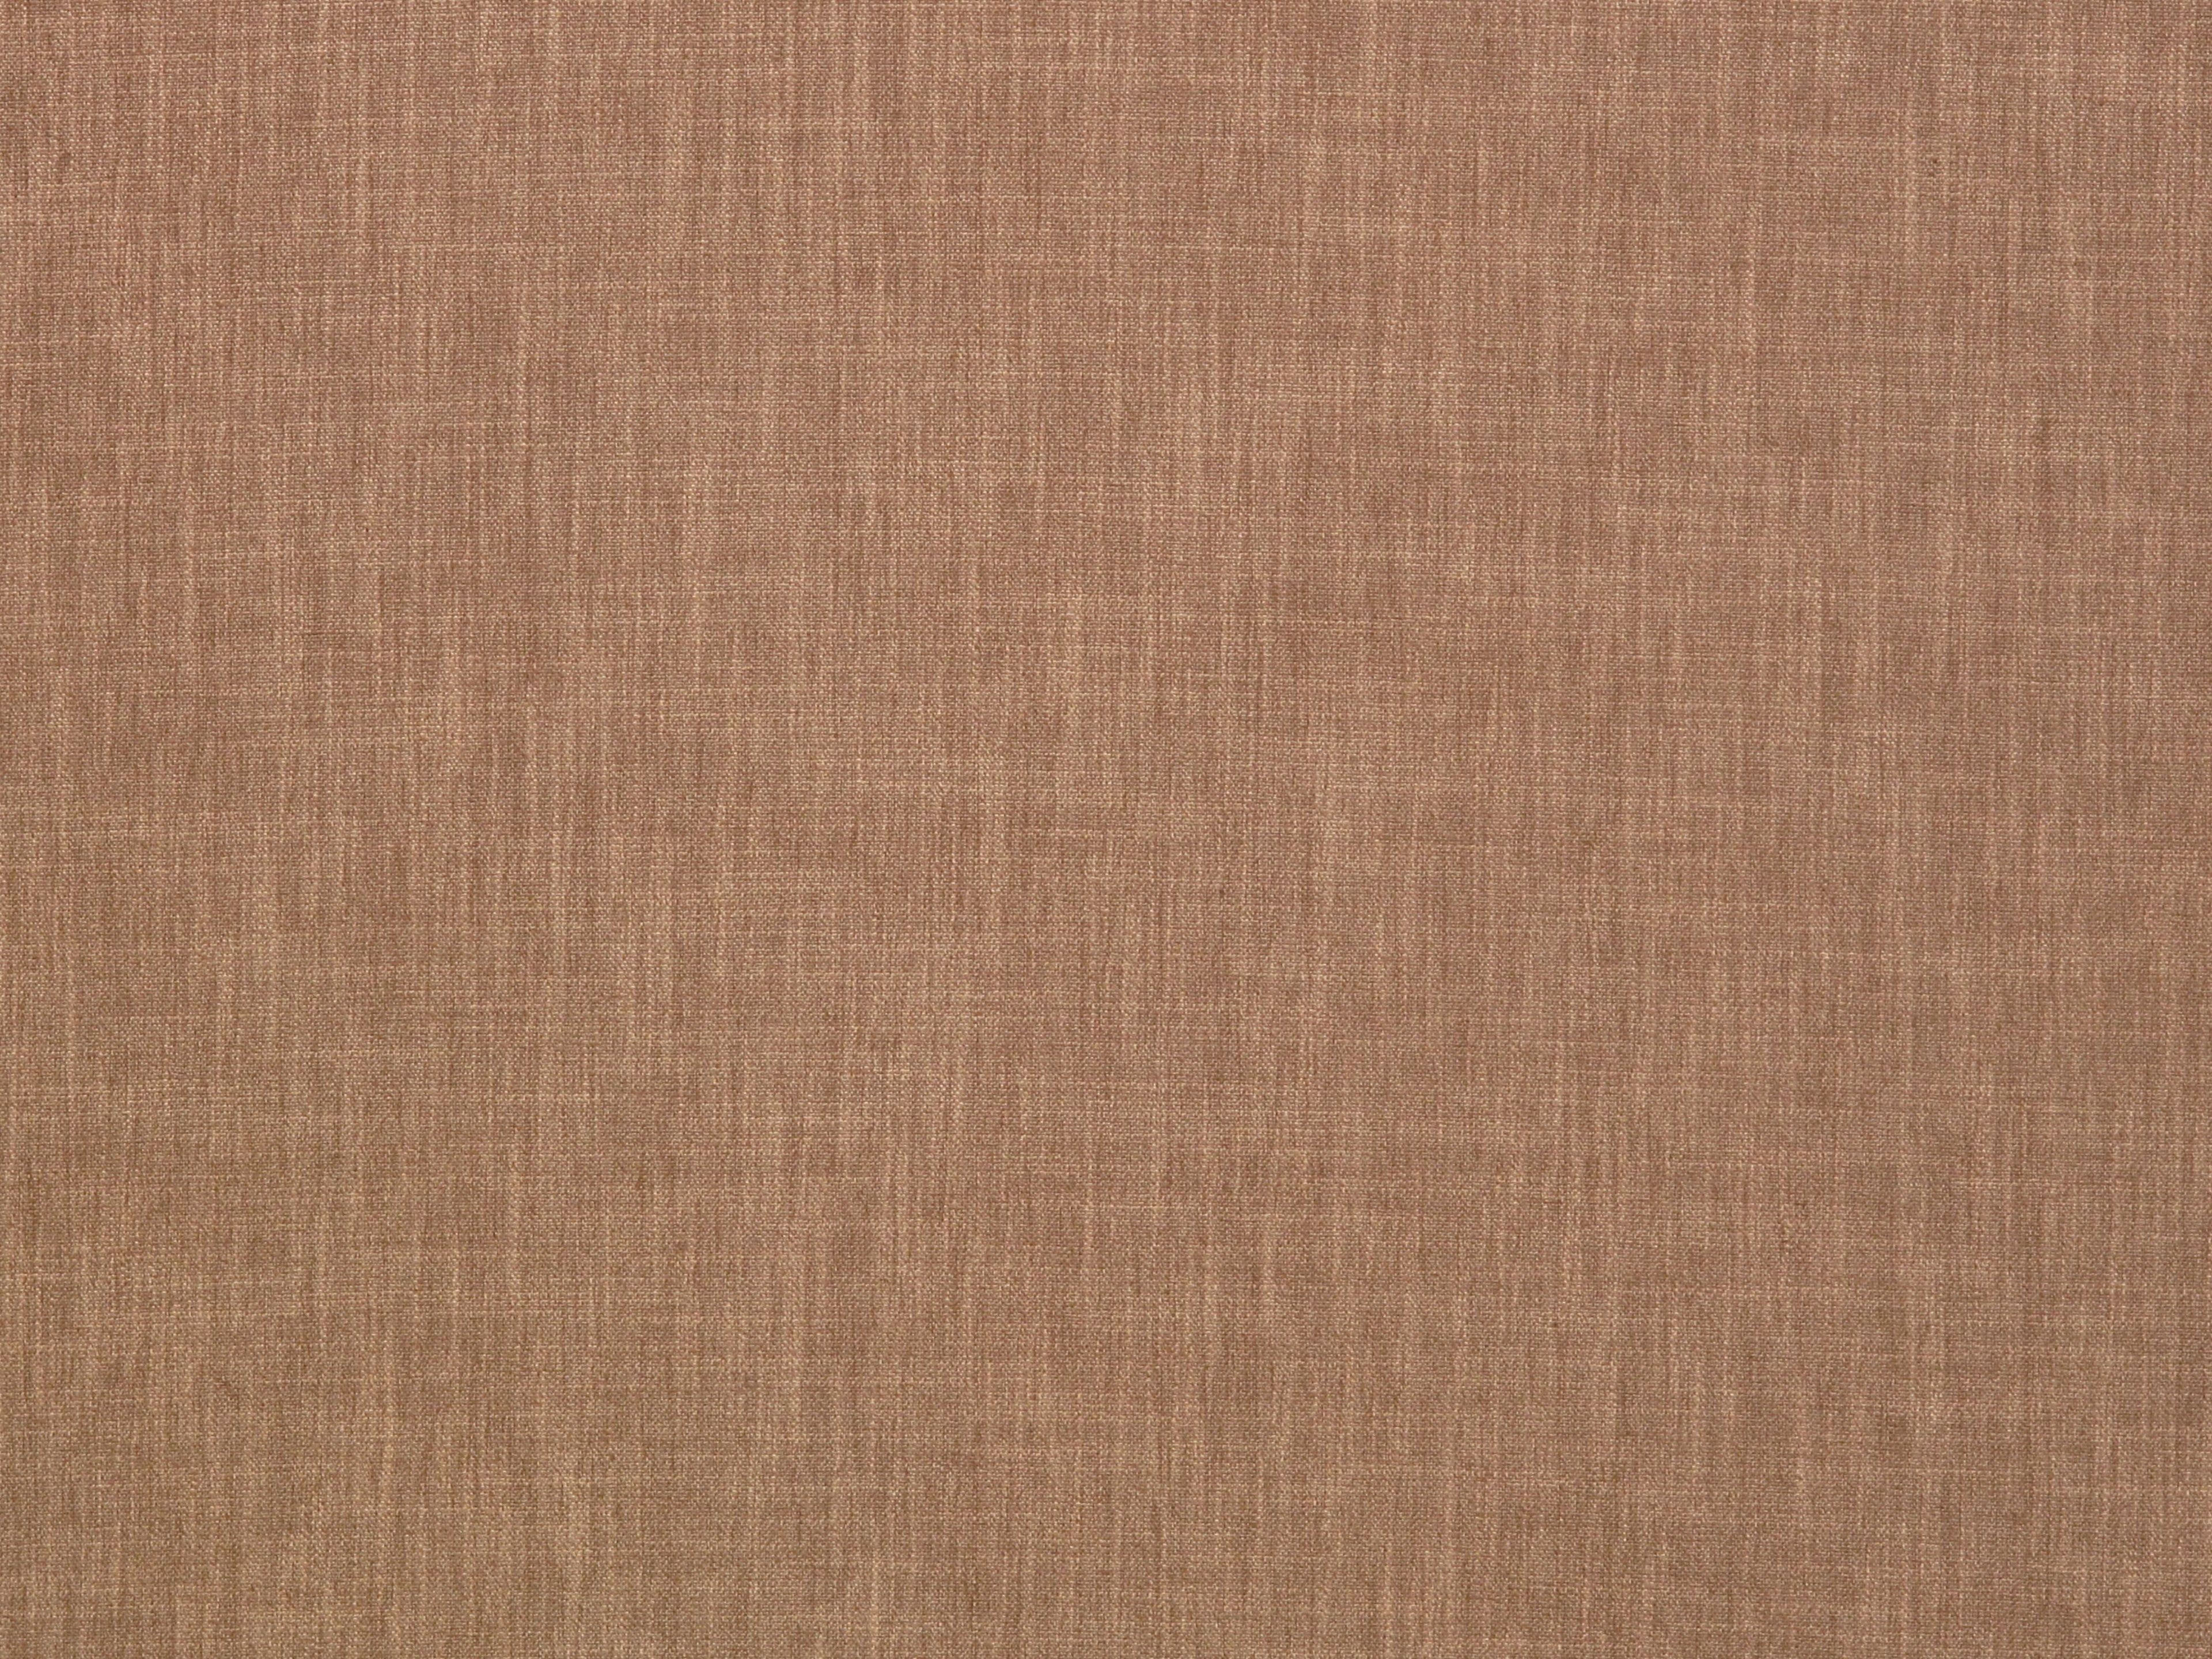 Flax fabric in toast color - pattern number H6 0006FLAX - by Scalamandre in the Old World Weavers collection